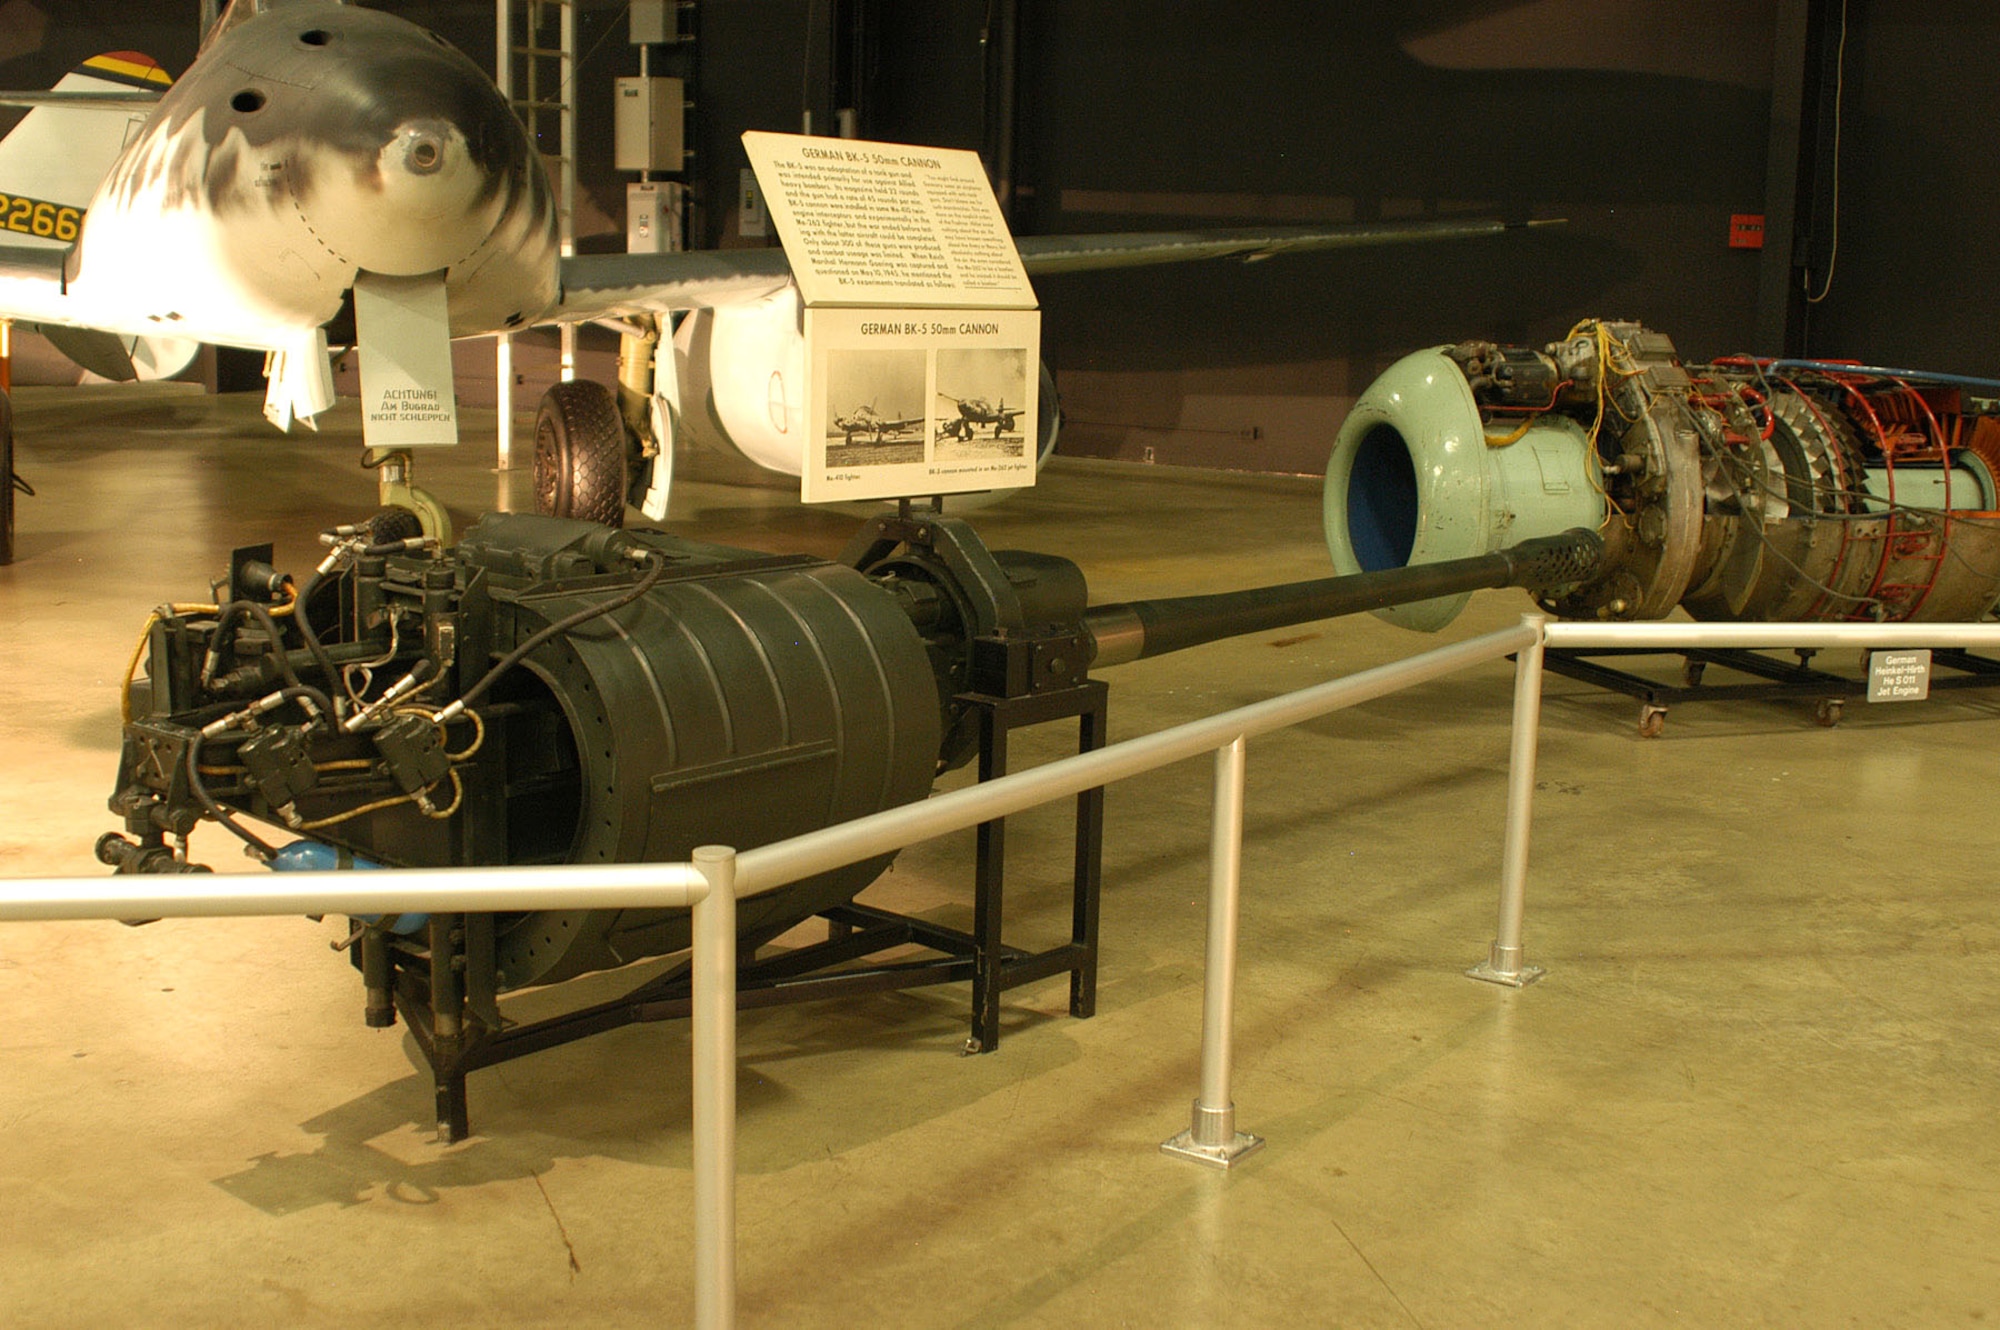 DAYTON, Ohio -- German BK-5 50mm cannon on display in the World War II Gallery at the National Museum of the United States Air Force. (U.S. Air Force photo)